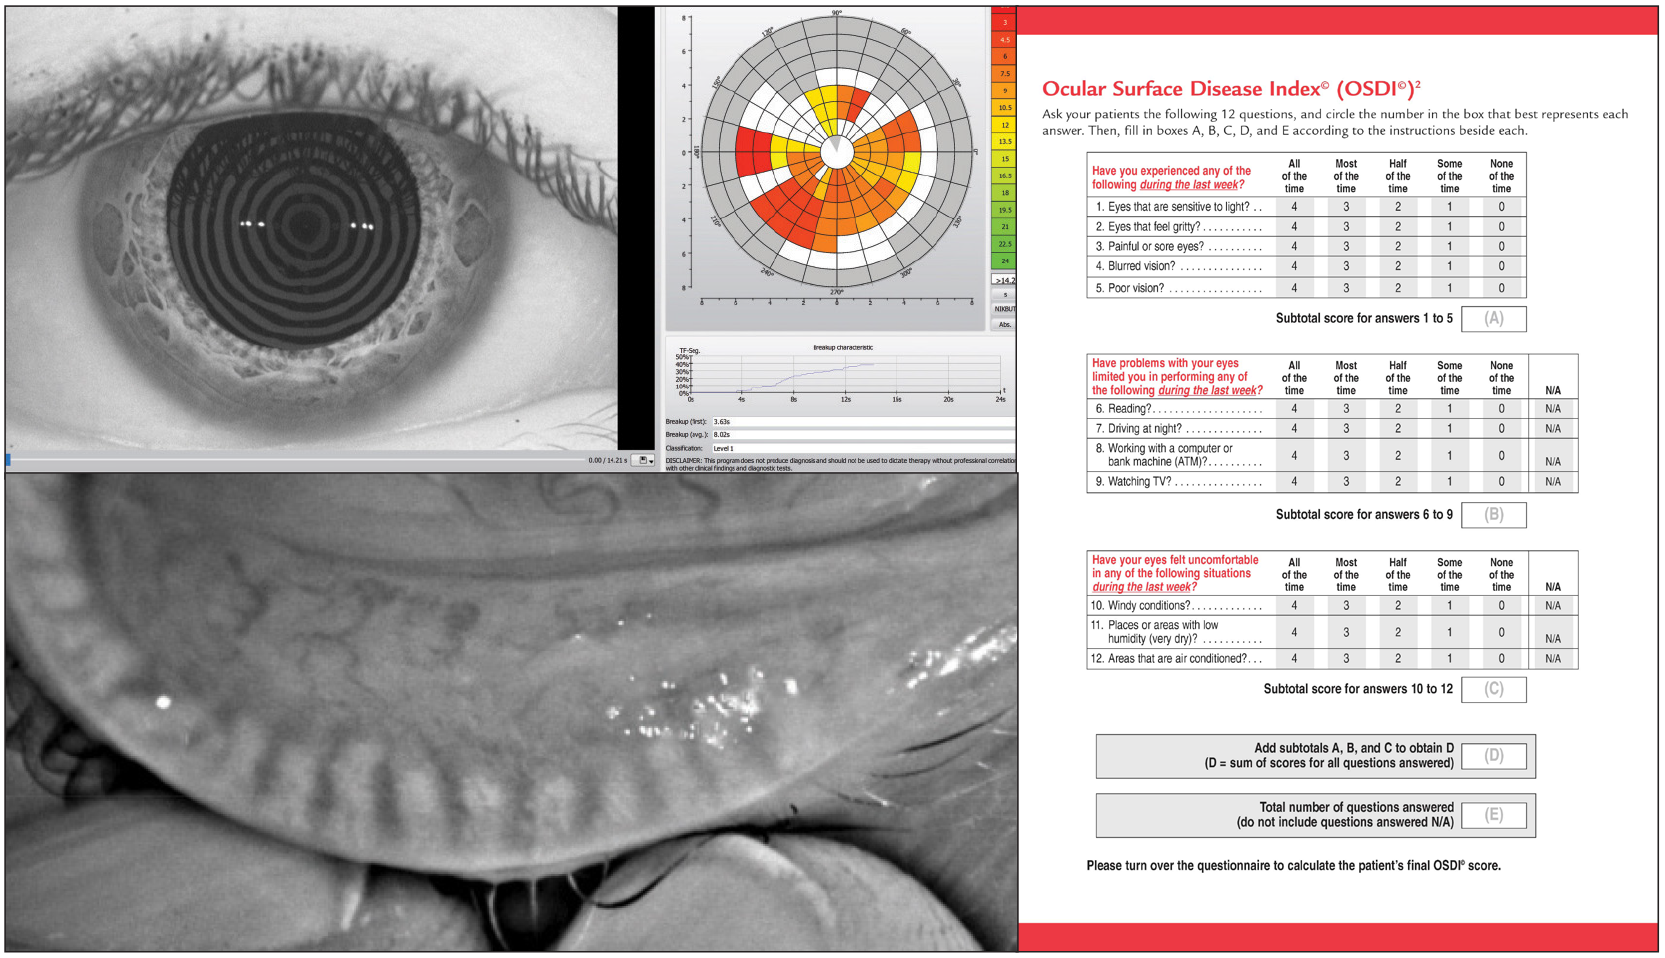 Noninvasive breakup time, meibomian gland shortening and performance on the OSDI questionnaire could give you early indications of a dry eye patient who’s about to become symptomatic.